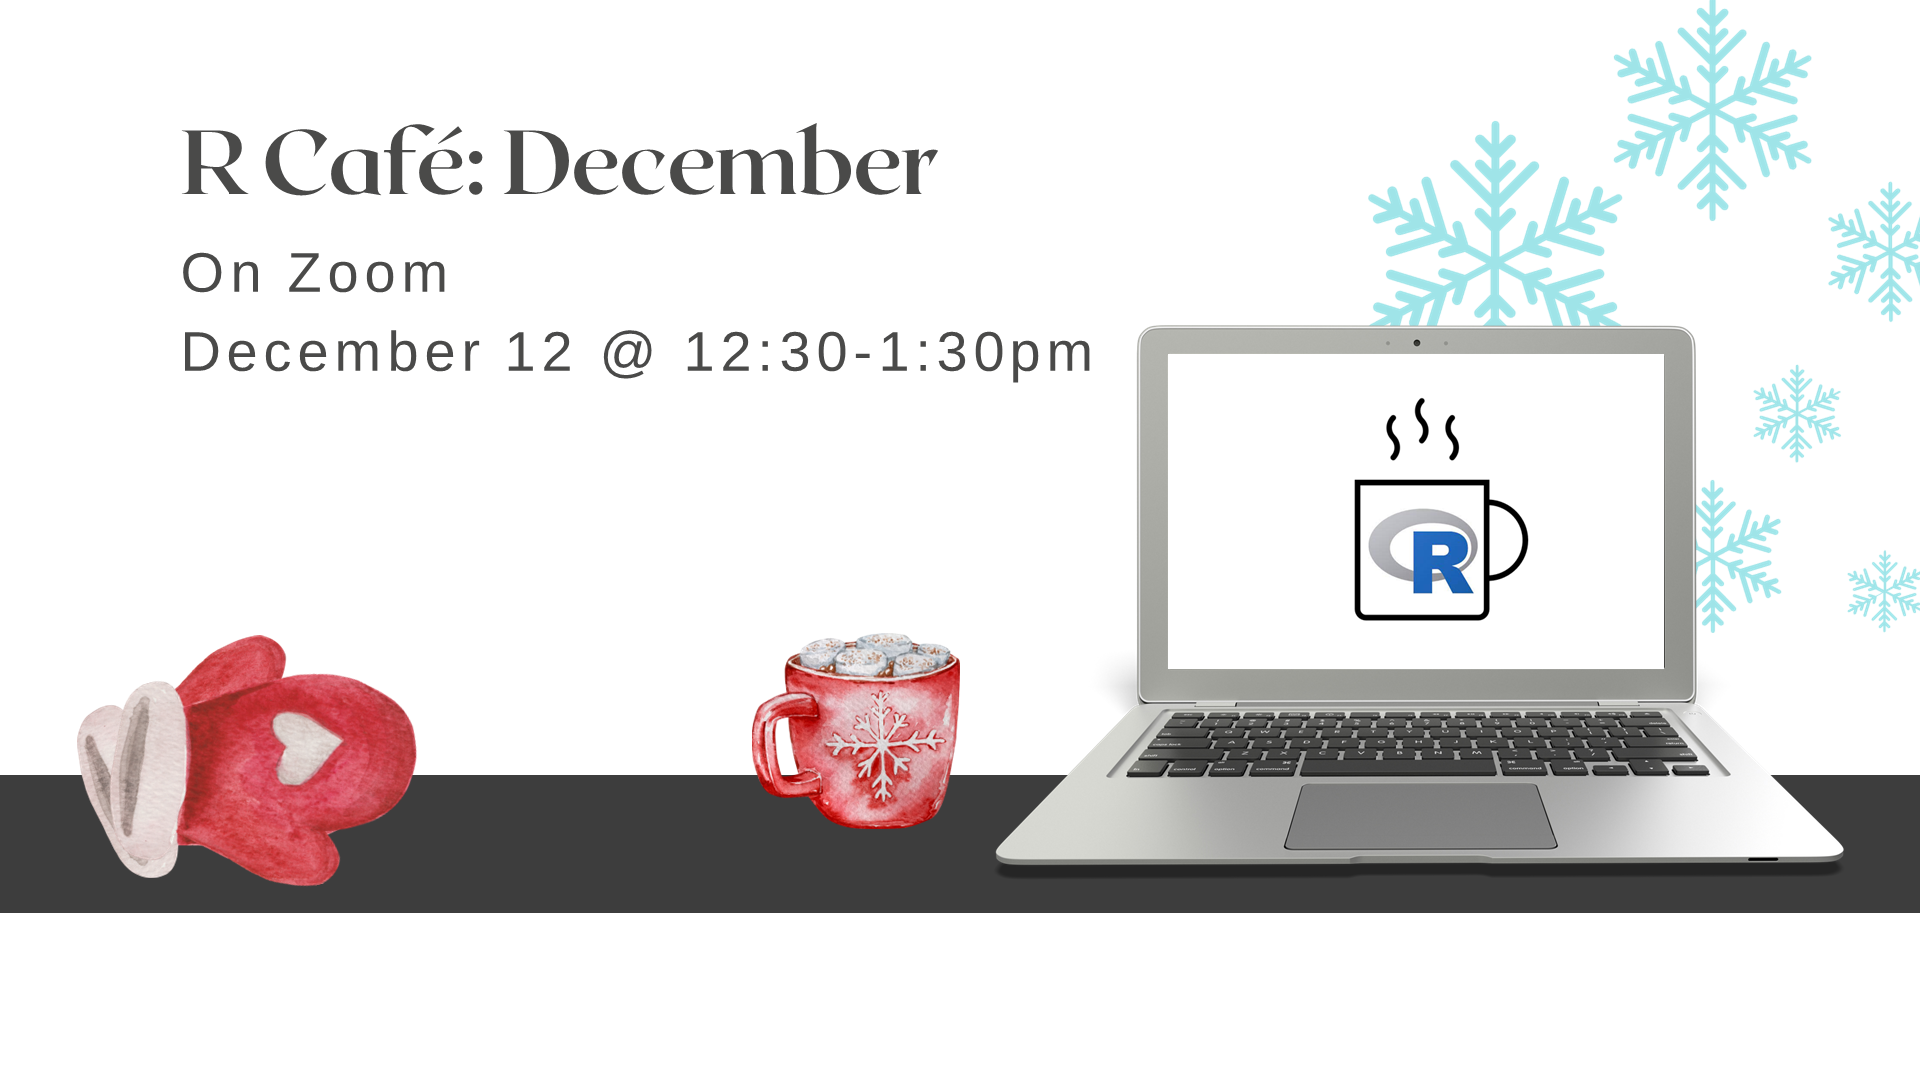 laptop with R Café logo, next to a mug of hot chocolate, mittens, and a background of snowflakes with text: R Café December on Zoom, December 12 at 12:30 to 1:30 pm